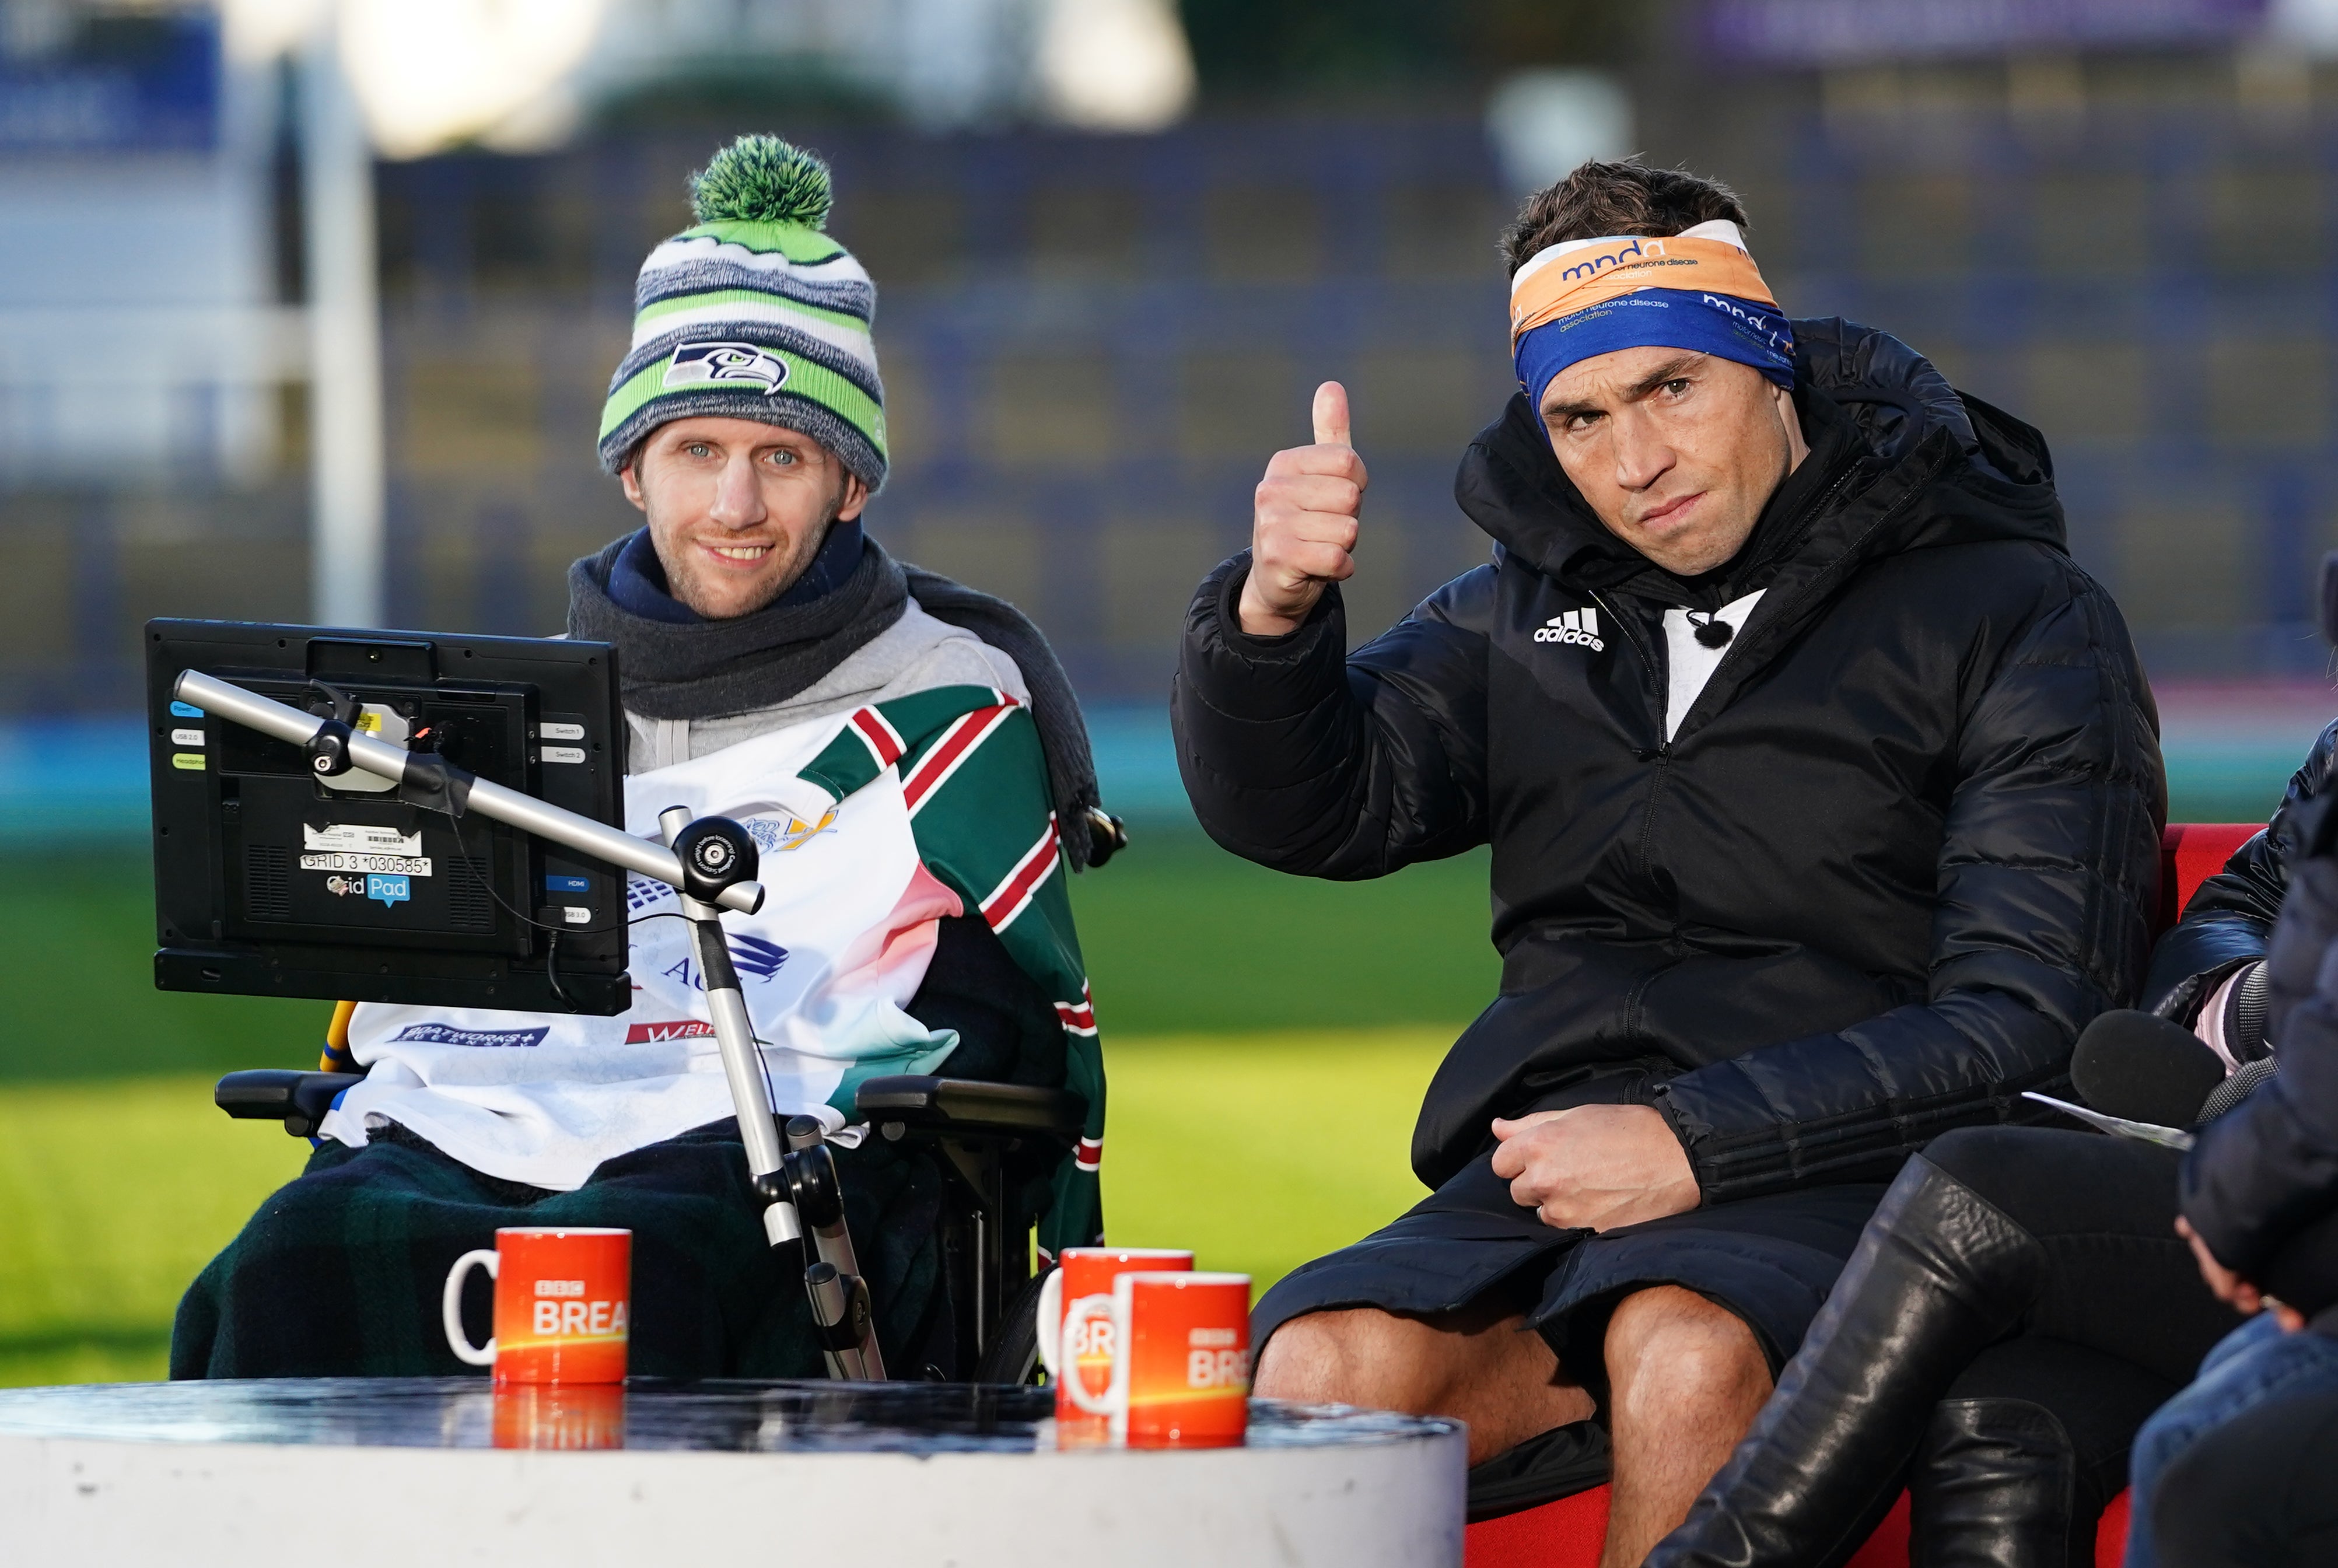 Kevin Sinfield (right) has been inspired to raise money by his great friend Rob Burrow’s fight against motor neurone disease